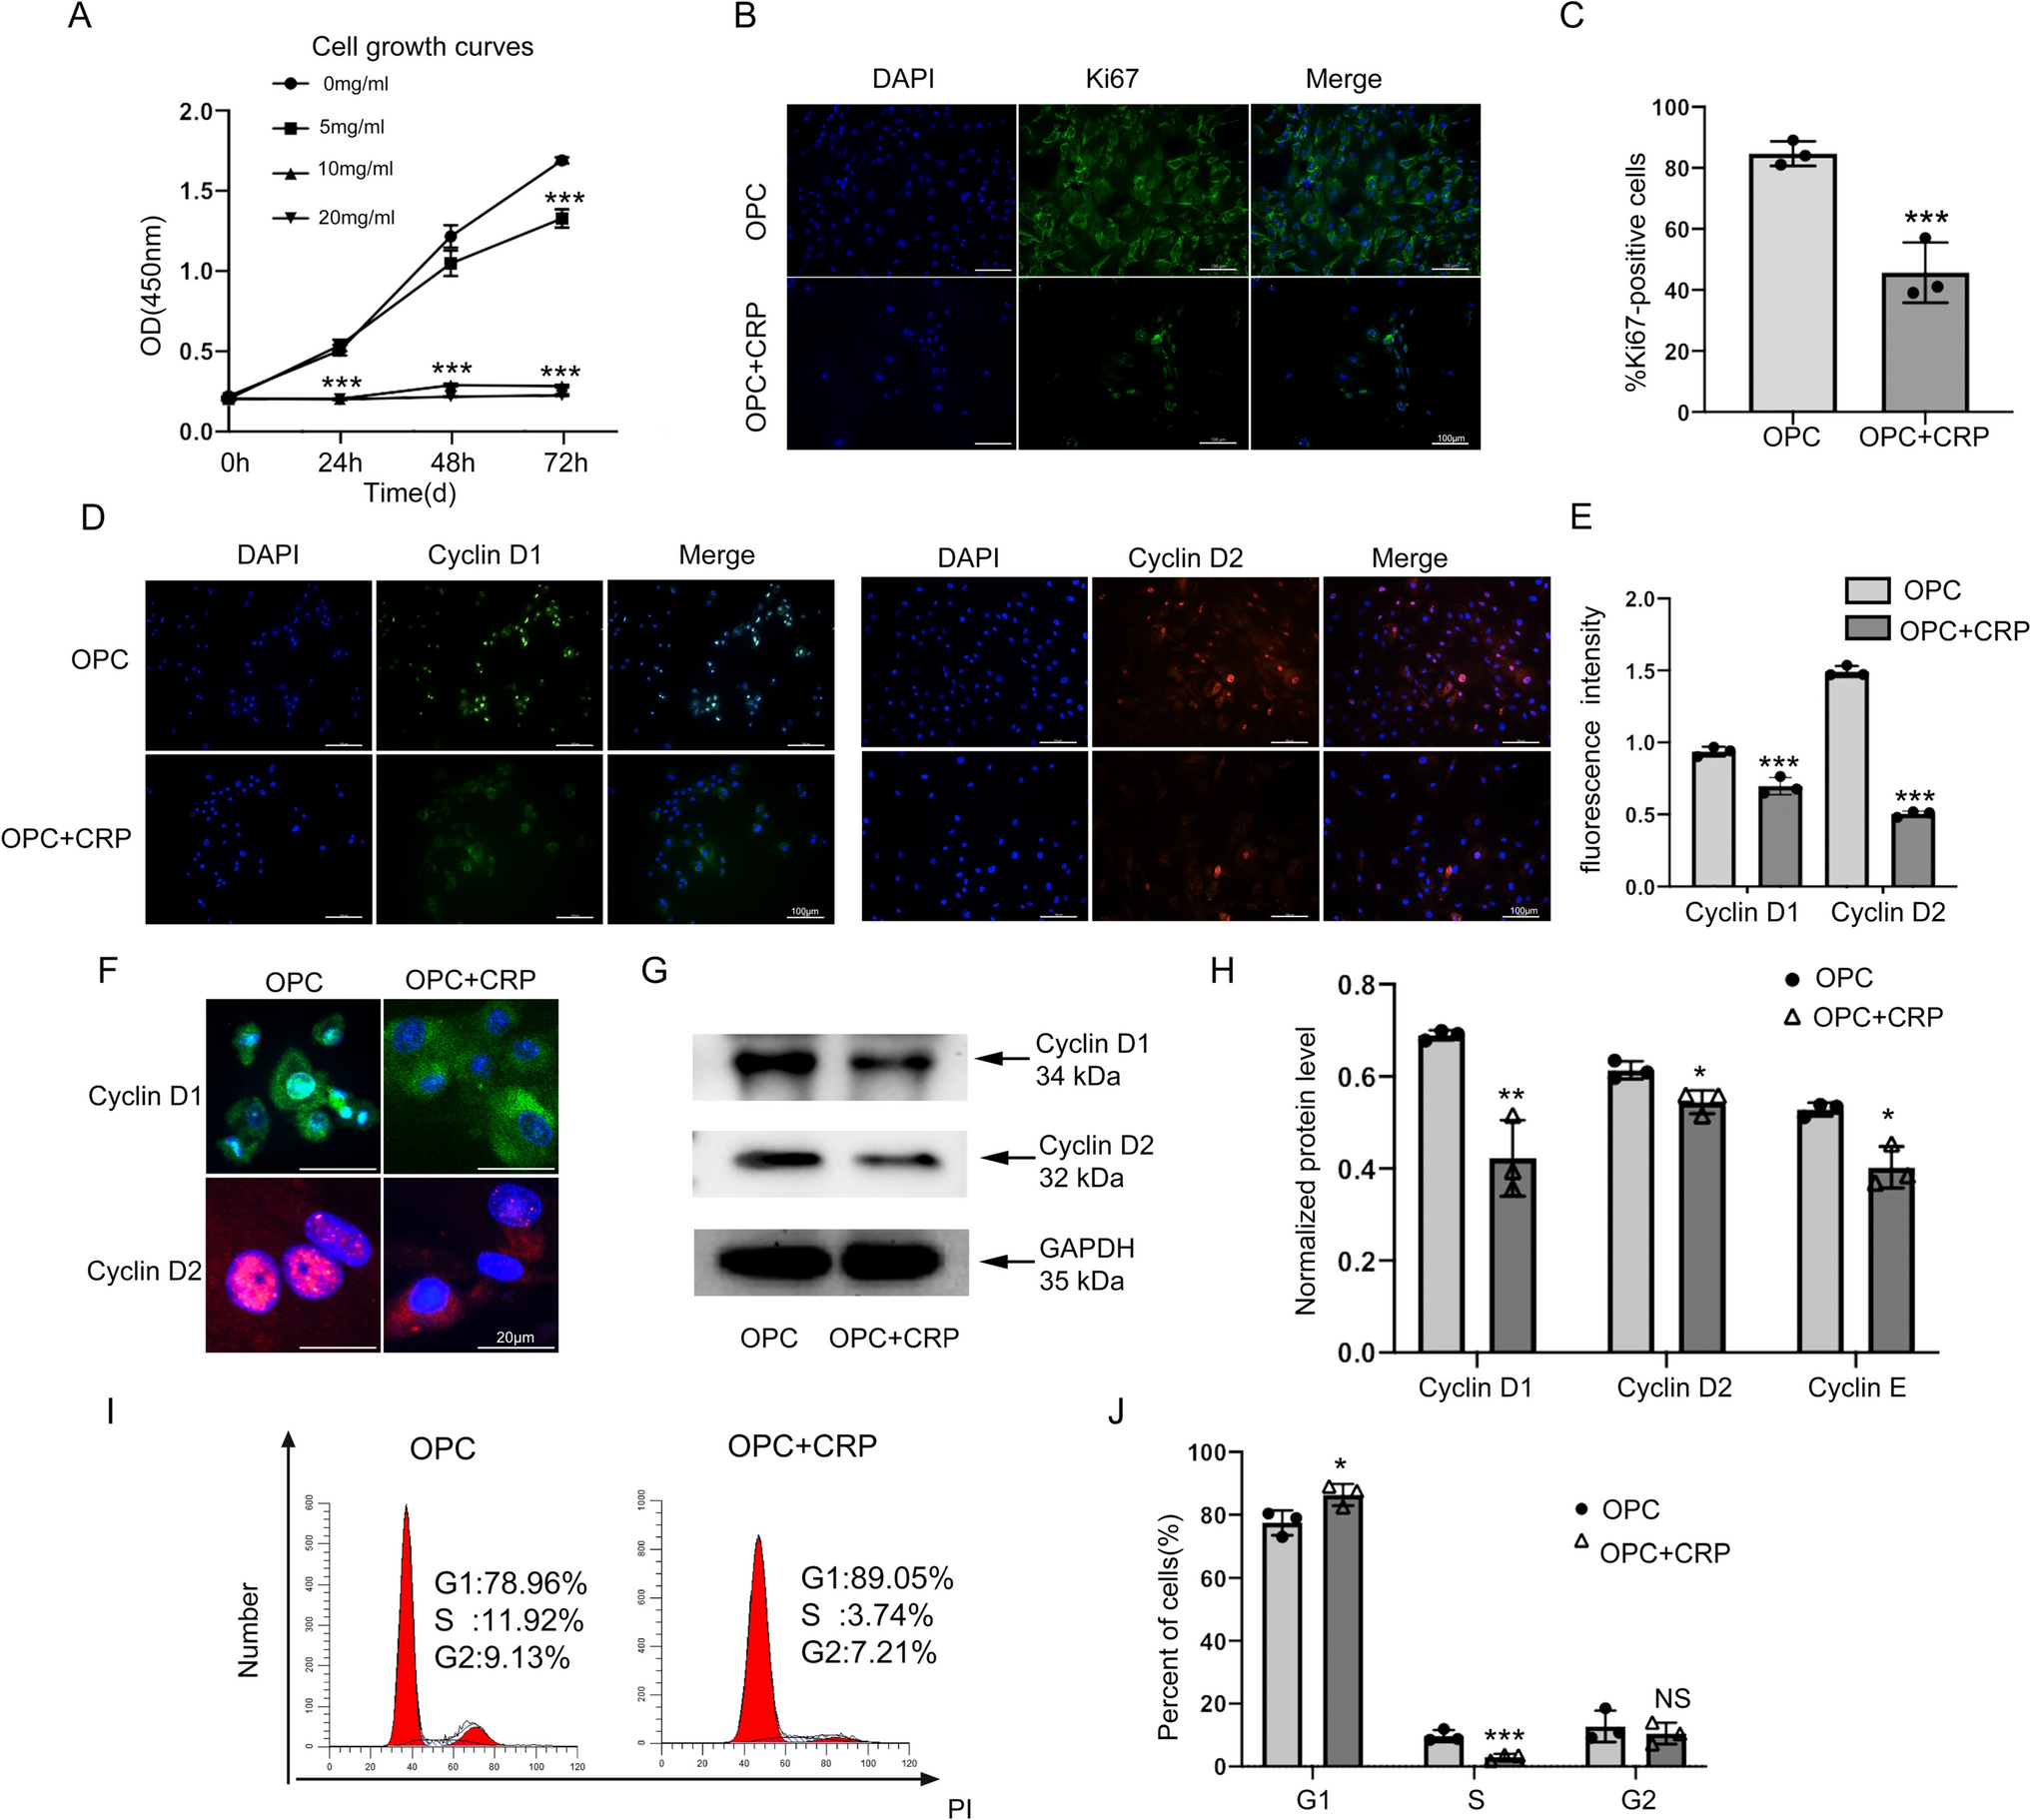 CRP inhibits the osteoblastic differentiation of OPCs via the up-regulation of primary cilia and repression of the Hedgehog signaling pathway